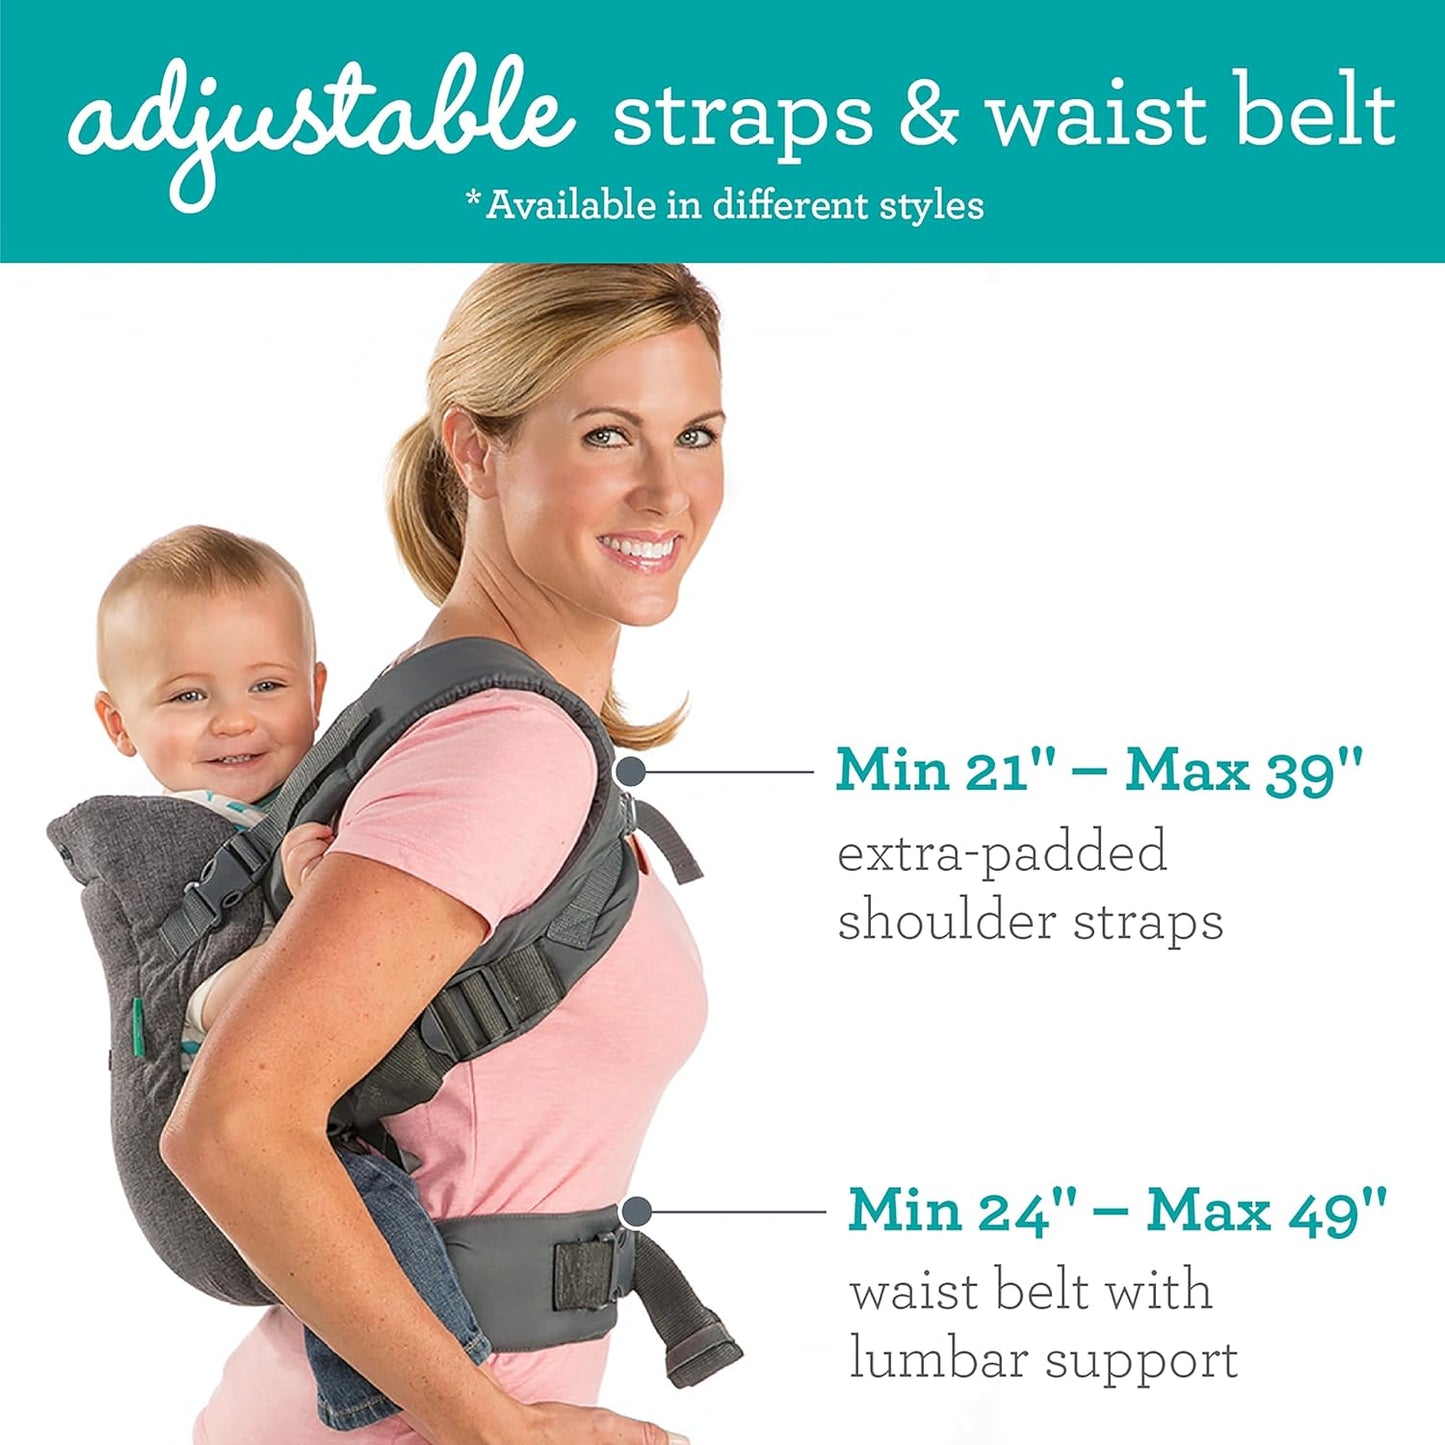 Infantino Flip Advanced 4-in-1 Carrier back carry for newborns and older babies 8-32 lbs